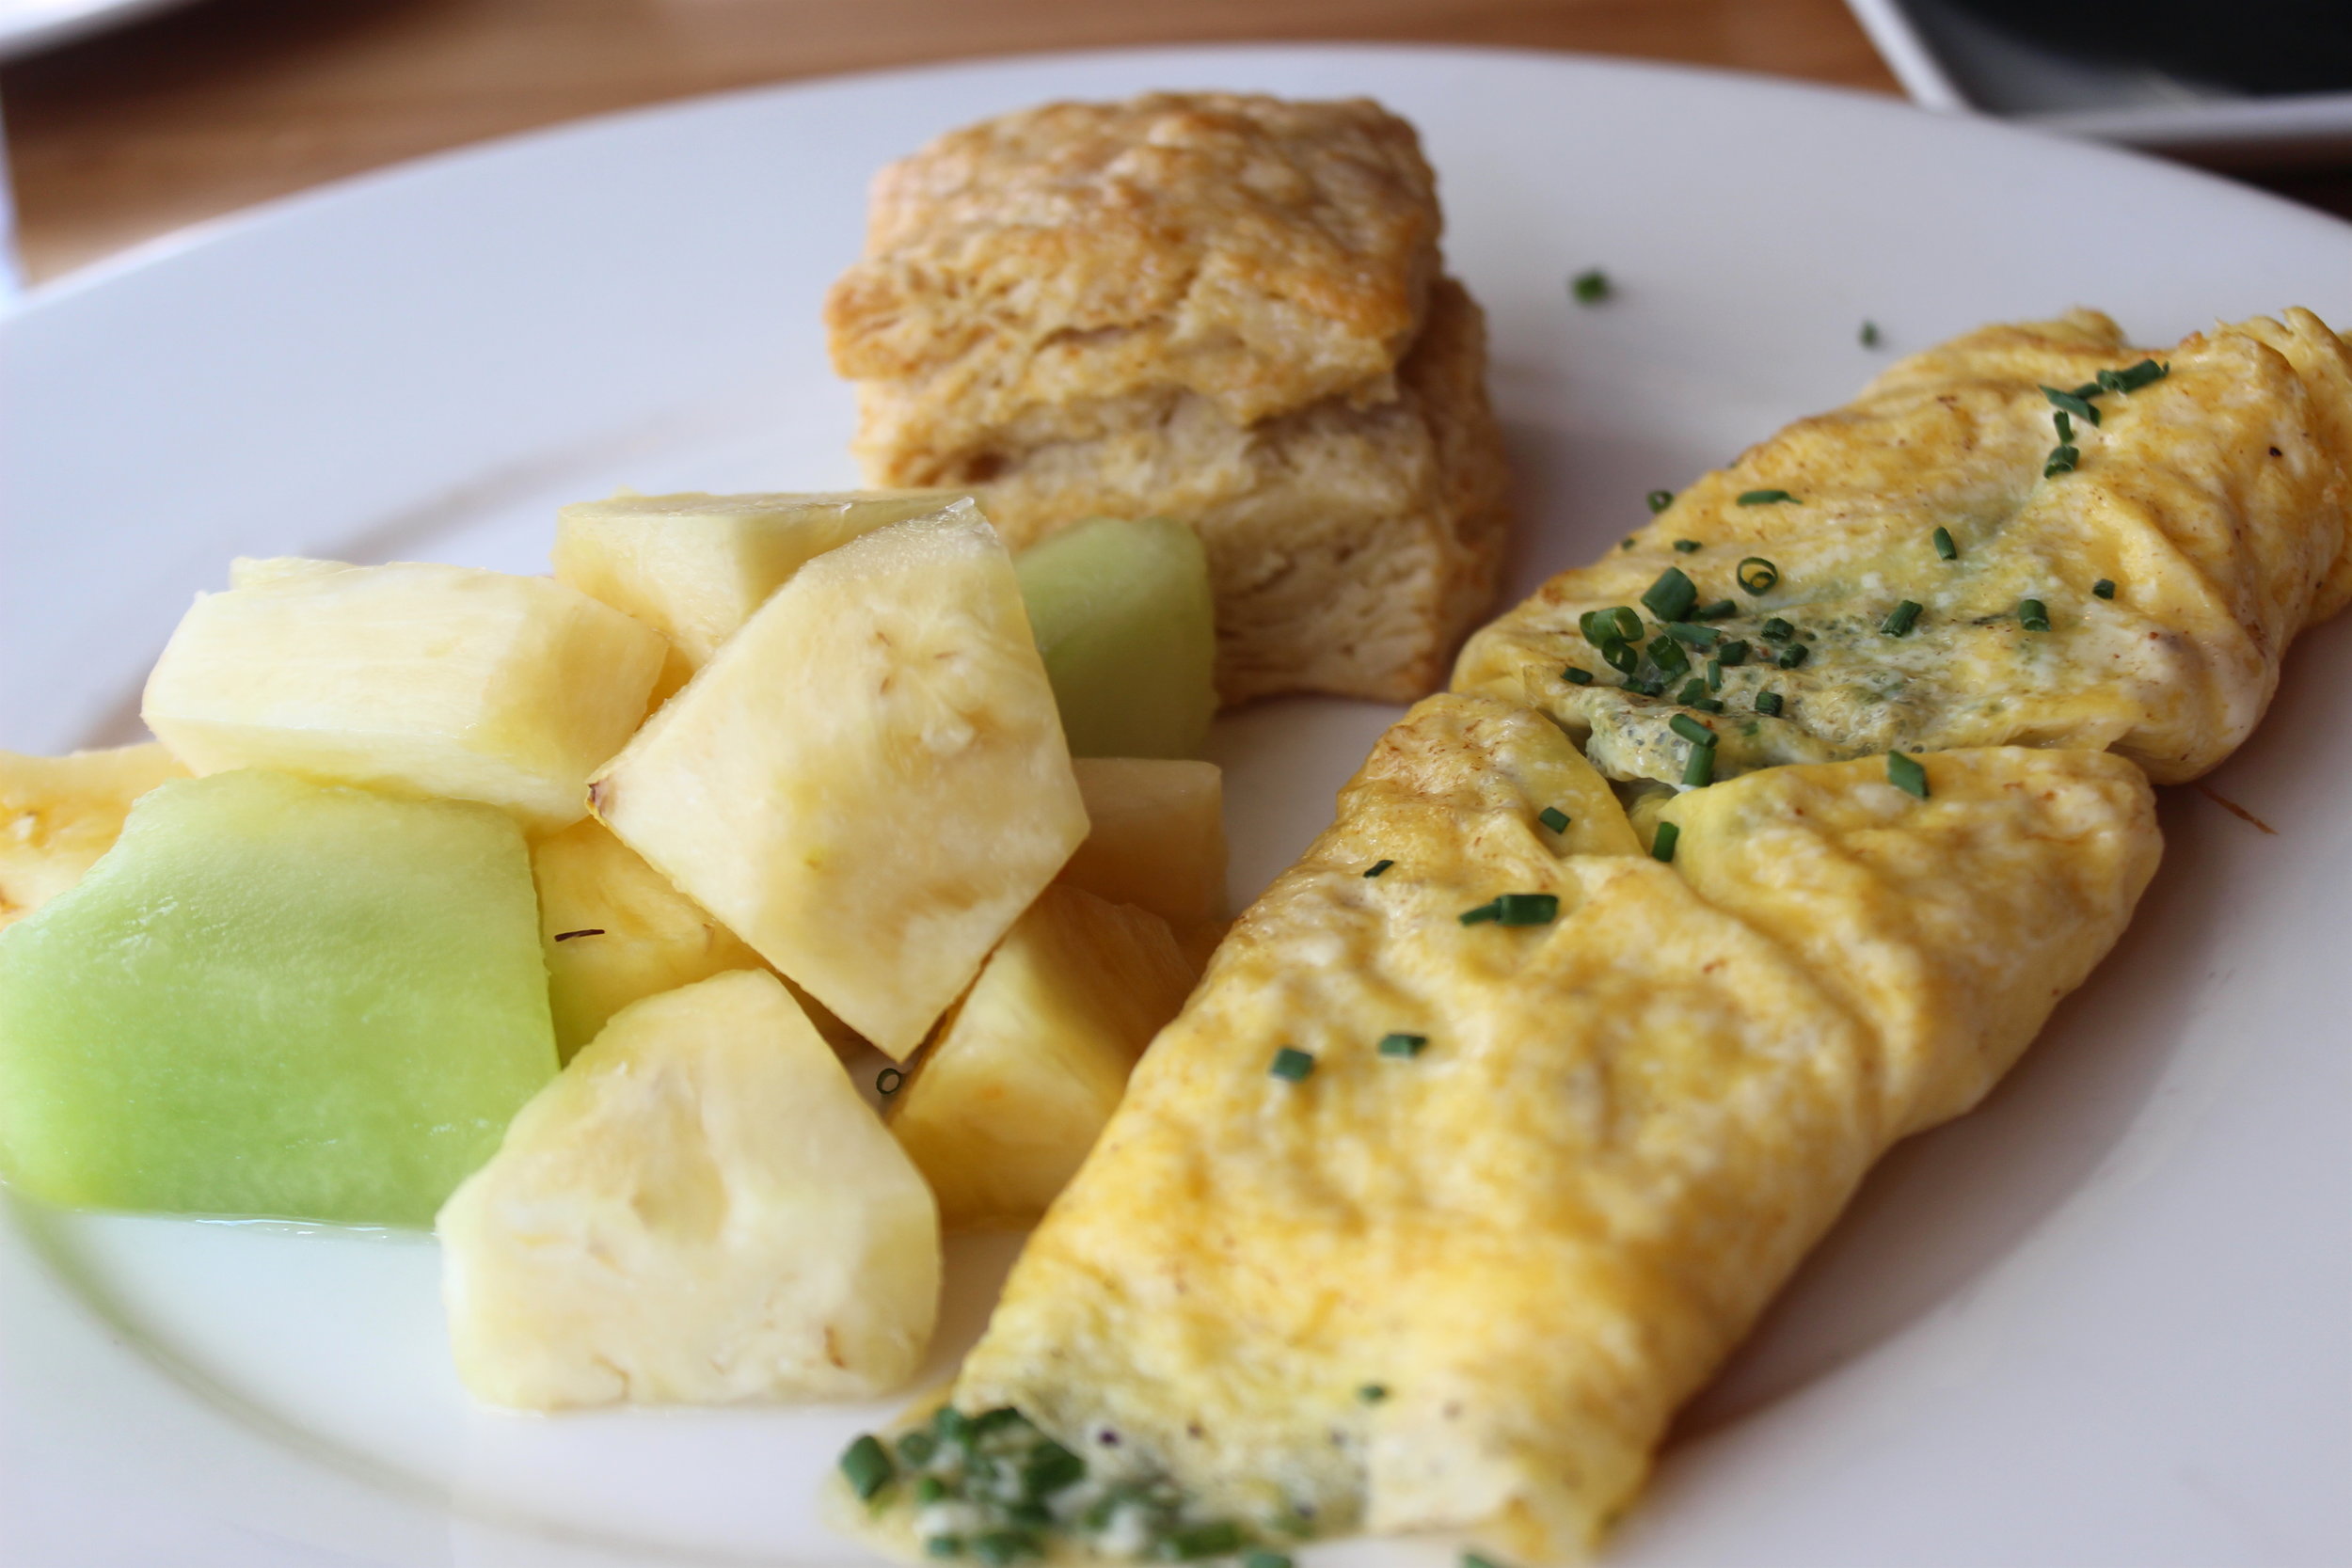 Omelet with Farm Fresh Eggs, Seasonal Fruit, House-made Buttermilk Biscuit